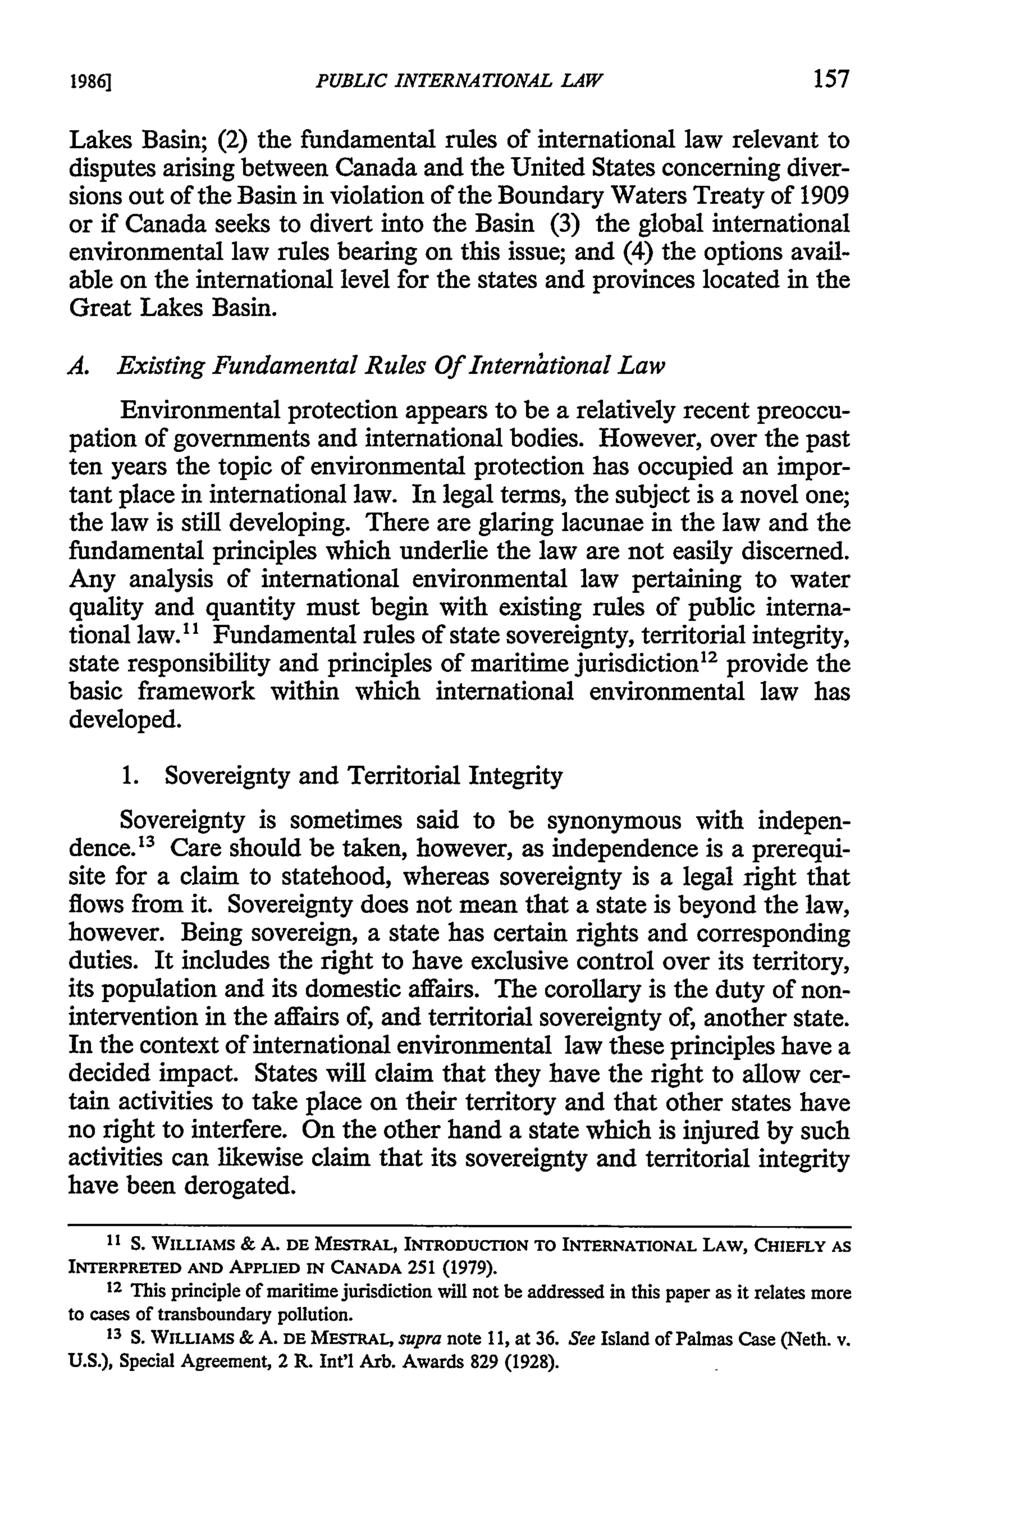 19861 PUBLIC INTERNATIONAL LAW Lakes Basin; (2) the fundamental rules of international law relevant to disputes arising between Canada and the United States concerning diversions out of the Basin in